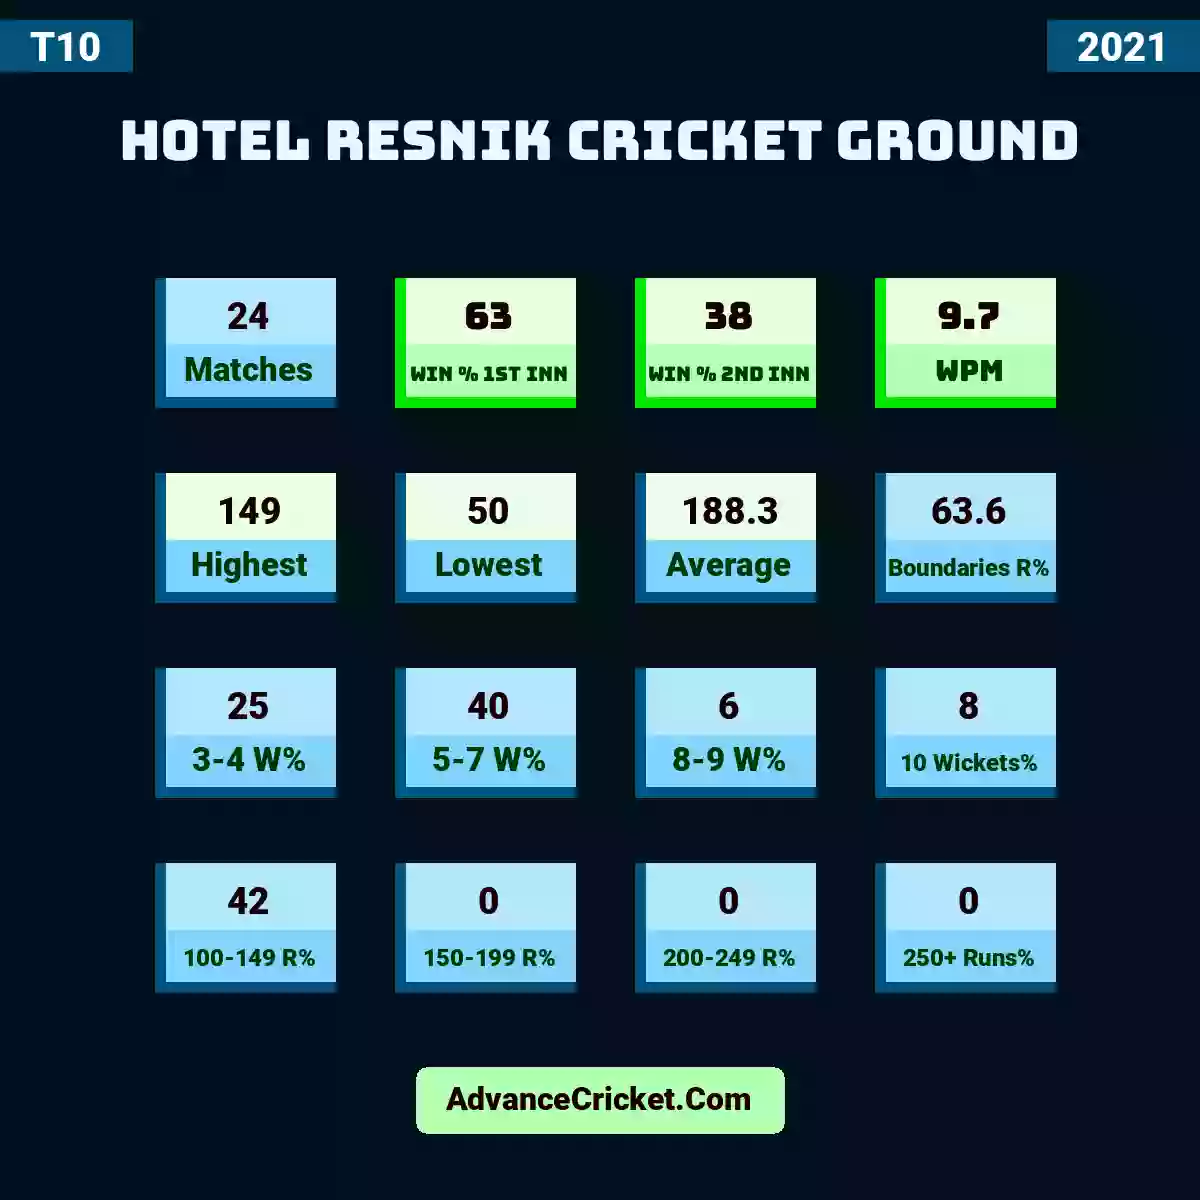 Image showing Hotel Resnik Cricket Ground with Matches: 24, Win % 1st Inn: 63, Win % 2nd Inn: 38, WPM: 9.7, Highest: 149, Lowest: 50, Average: 188.3, Boundaries R%: 63.6, 3-4 W%: 25, 5-7 W%: 40, 8-9 W%: 6, 10 Wickets%: 8, 100-149 R%: 42, 150-199 R%: 0, 200-249 R%: 0, 250+ Runs%: 0.